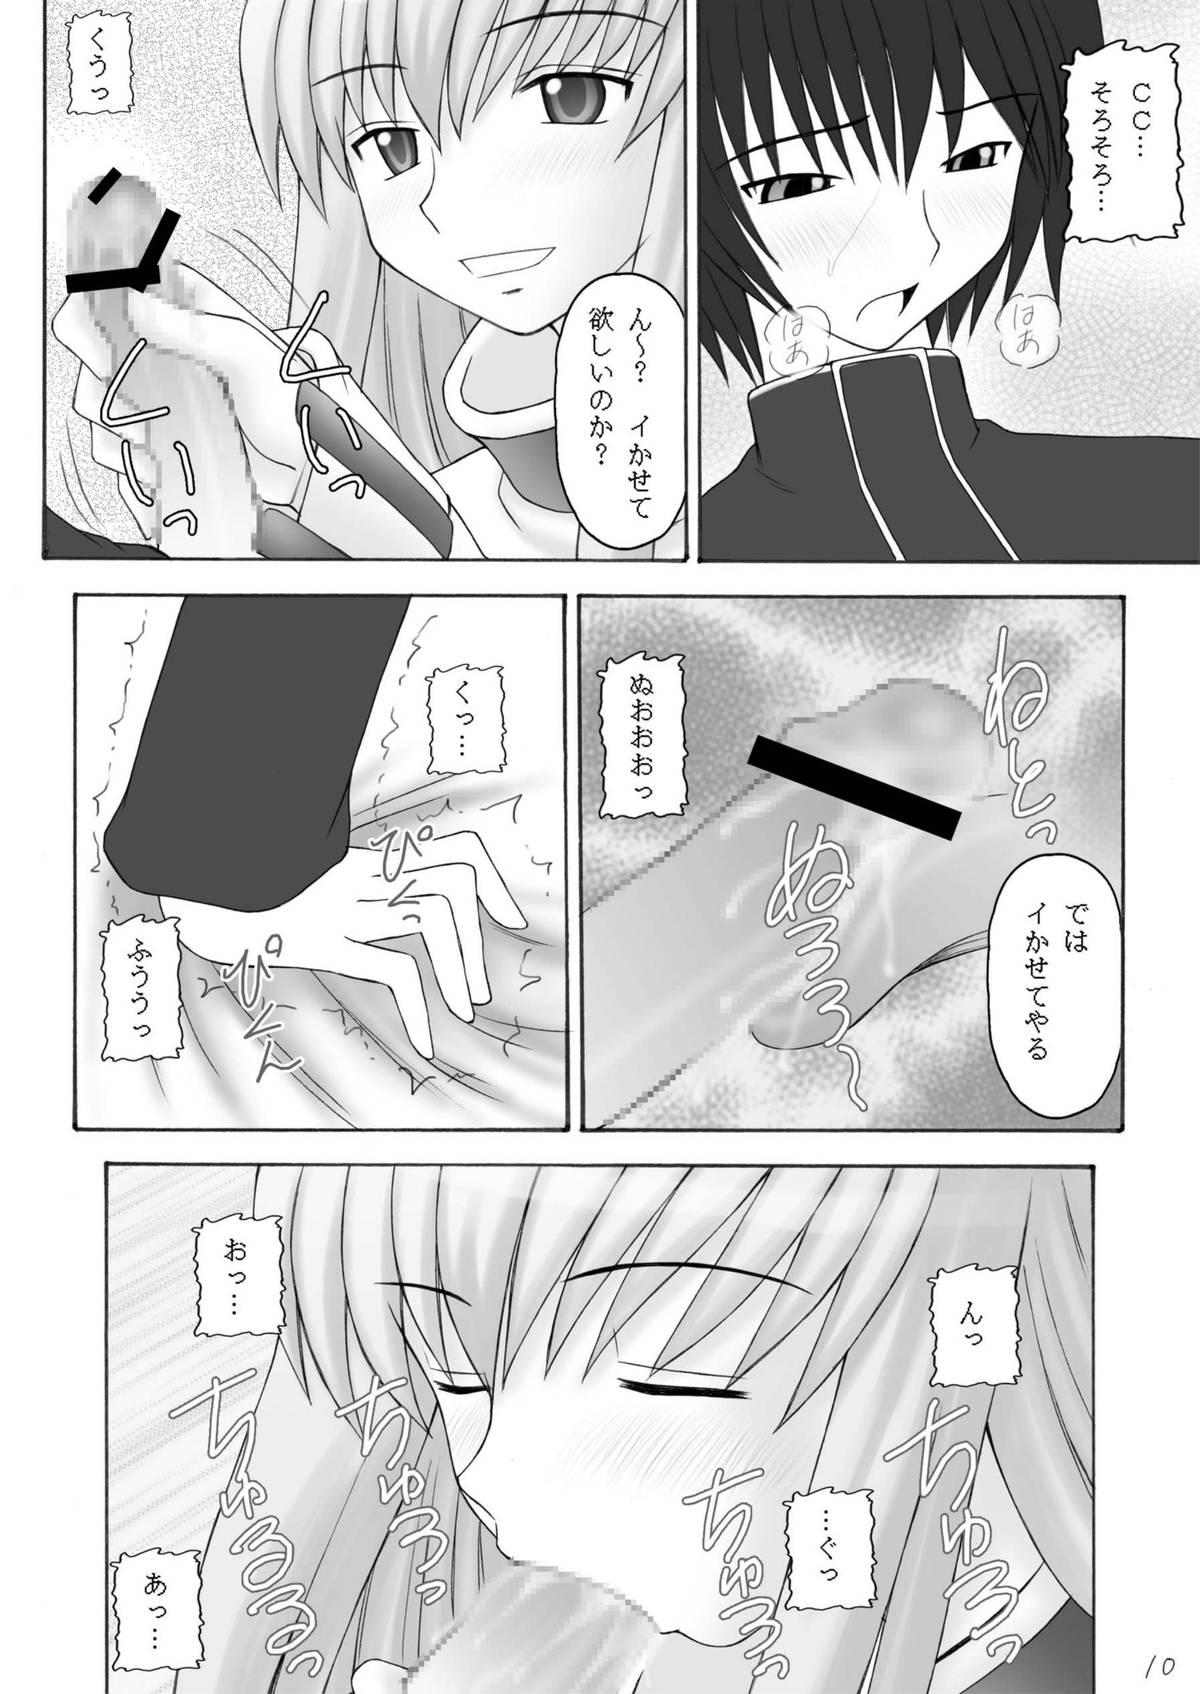 Foreskin C×2 - Code geass Tease - Page 10